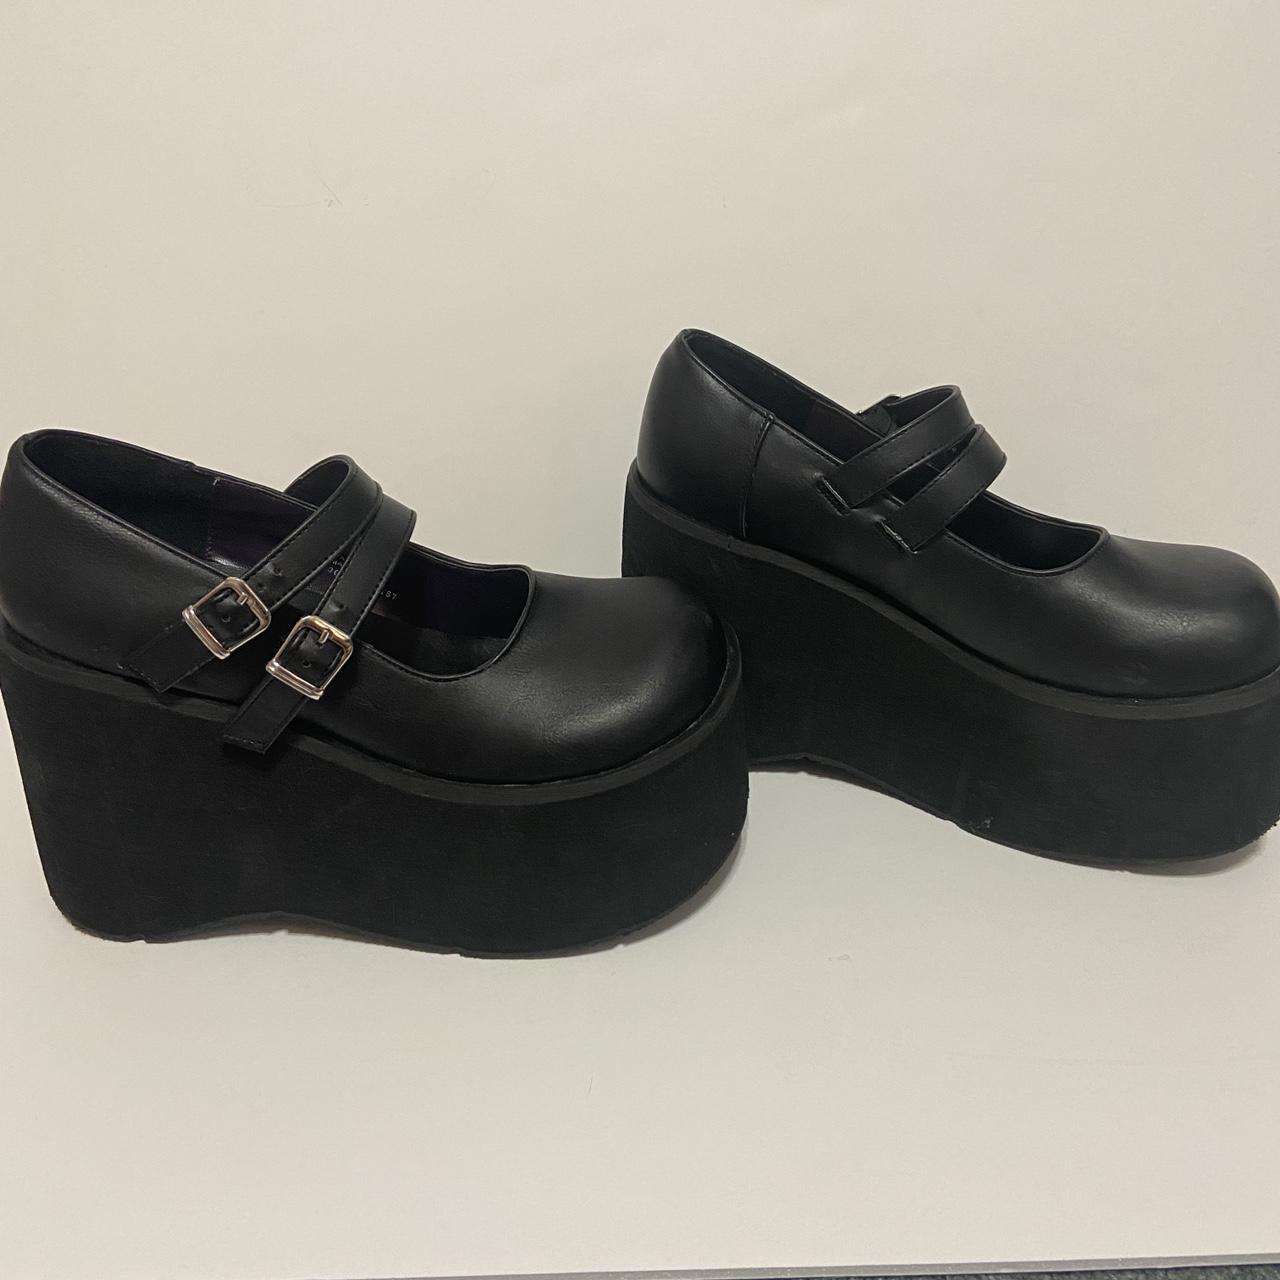 Demonia platform Mary janes Size 7 with about a 4... - Depop